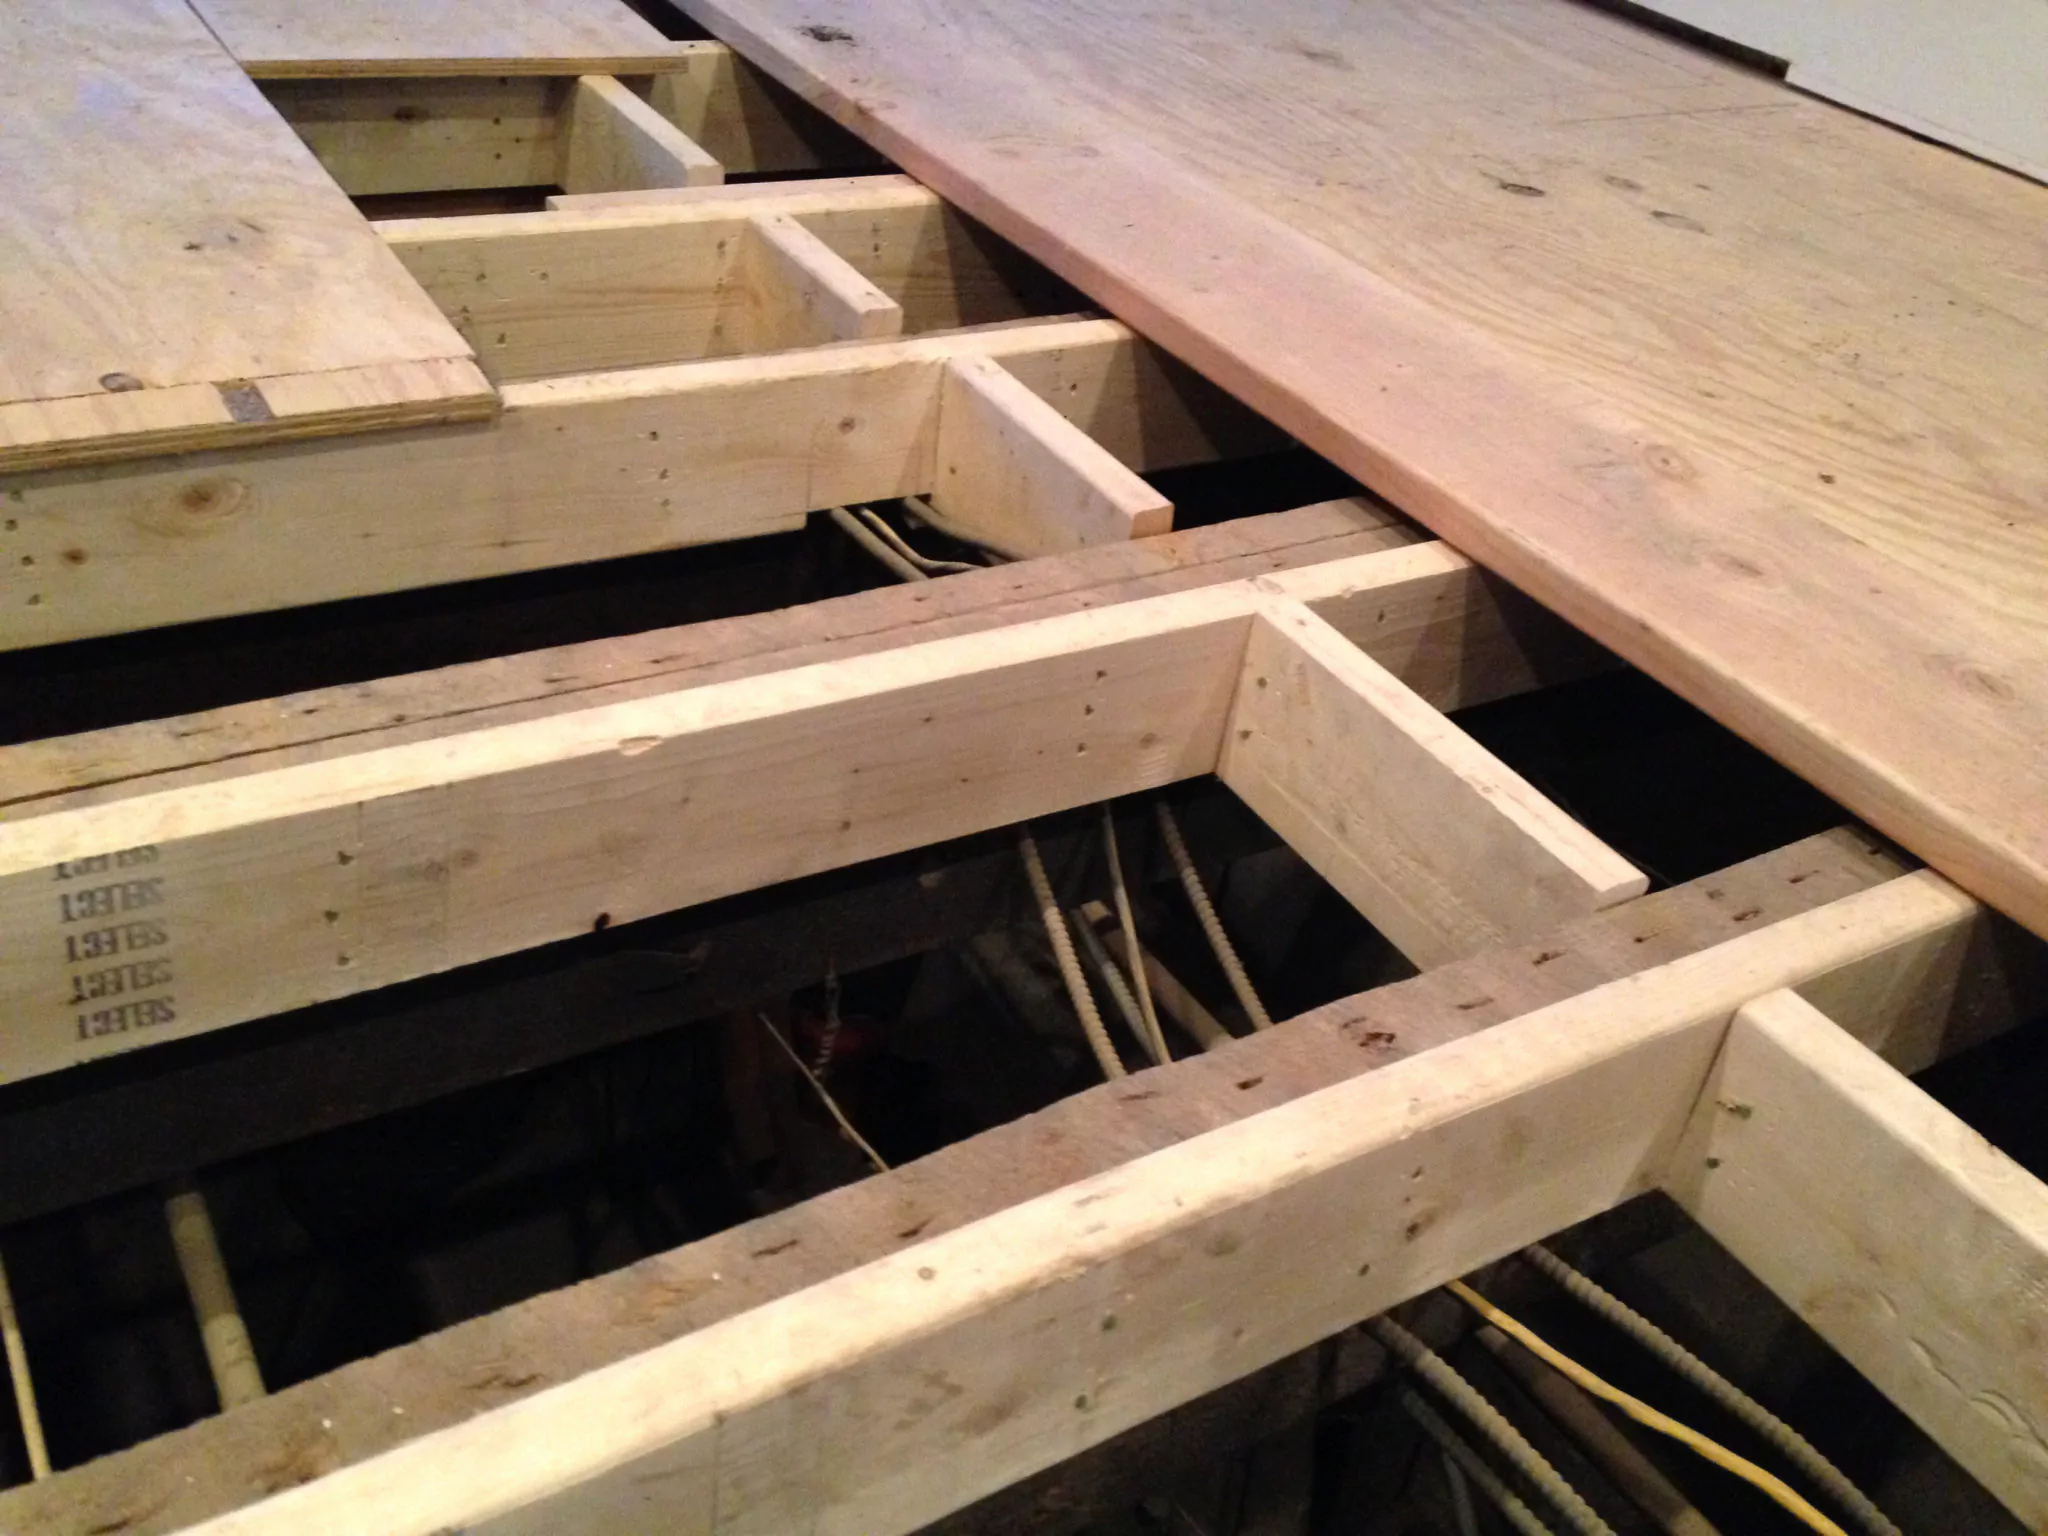 The beams and floor joists below the floor may have deteriorated, leading to sagging and dipping